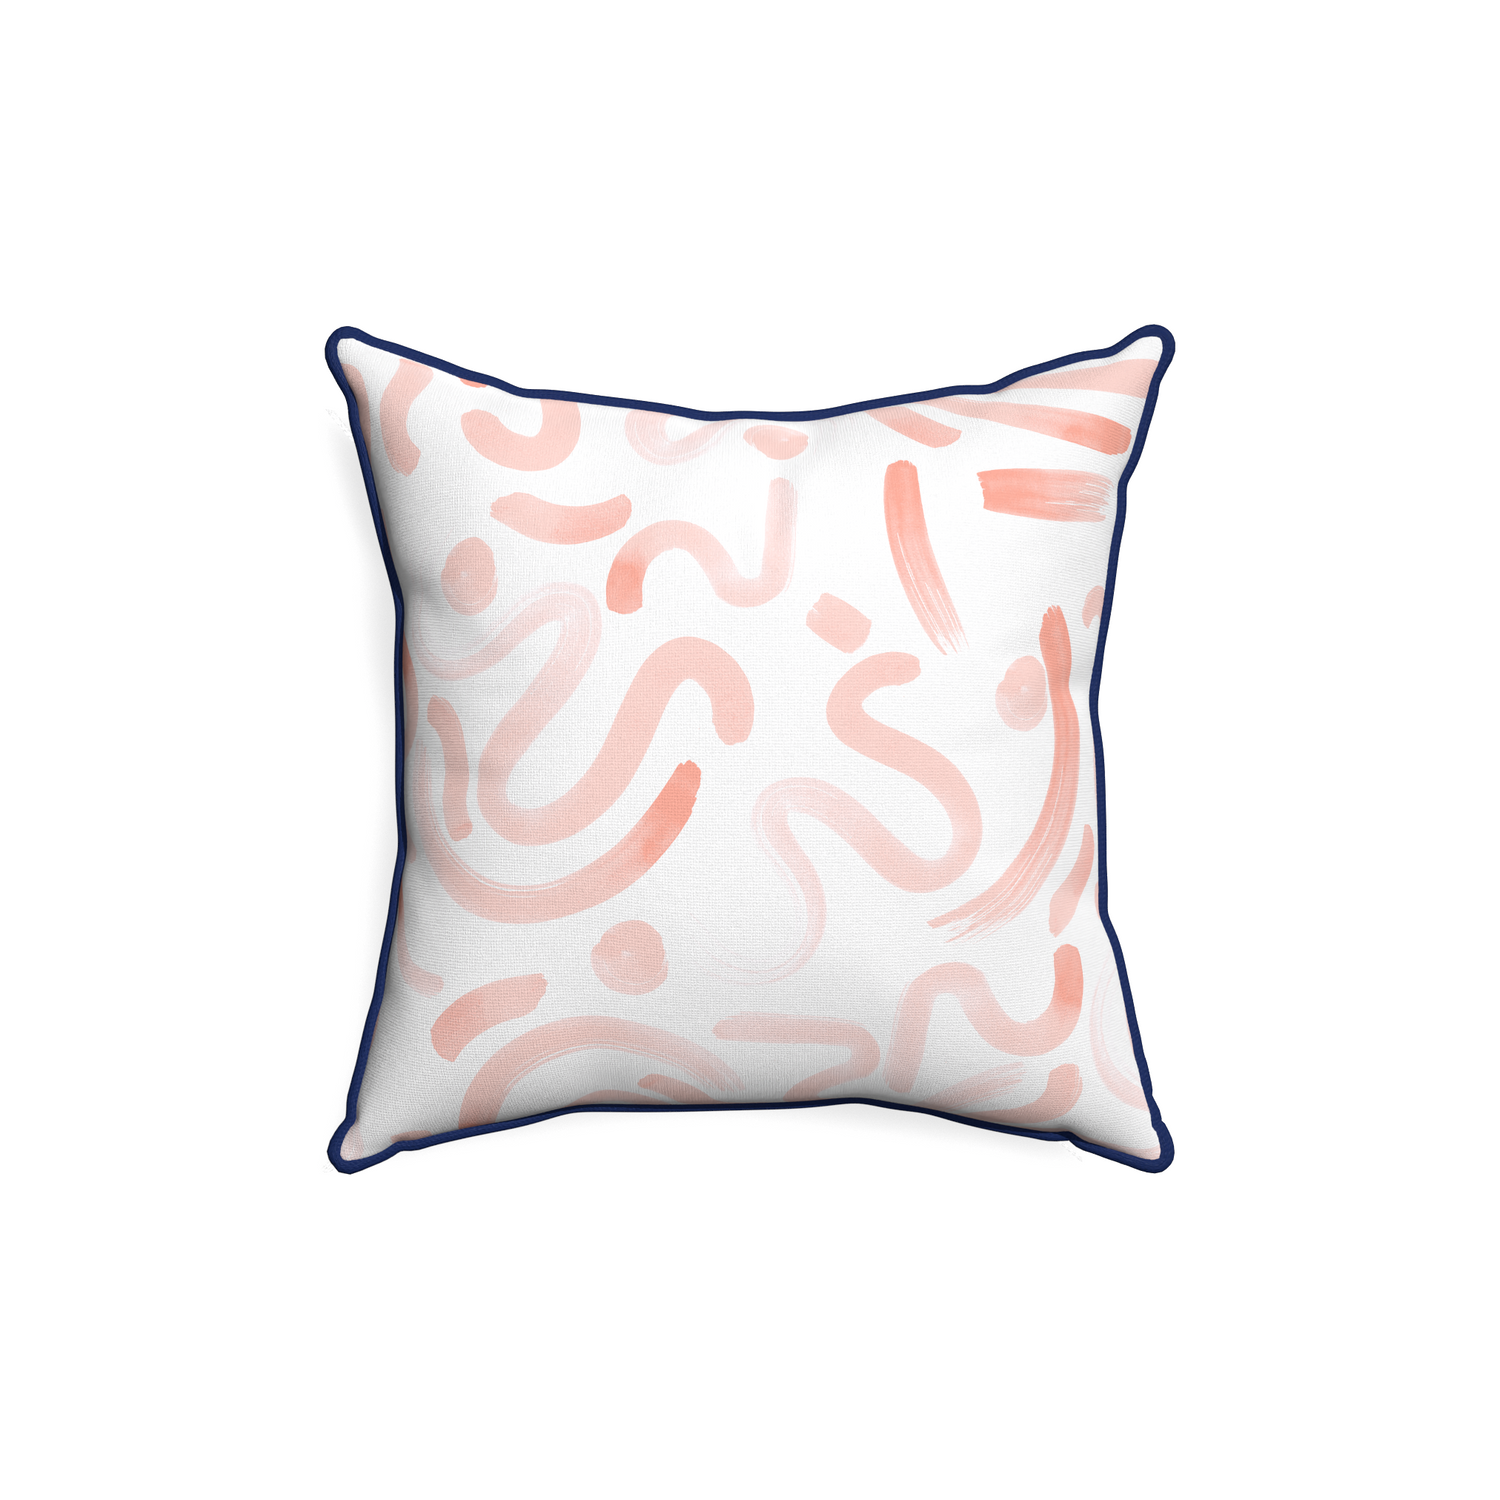 18-square hockney pink custom pink graphicpillow with midnight piping on white background